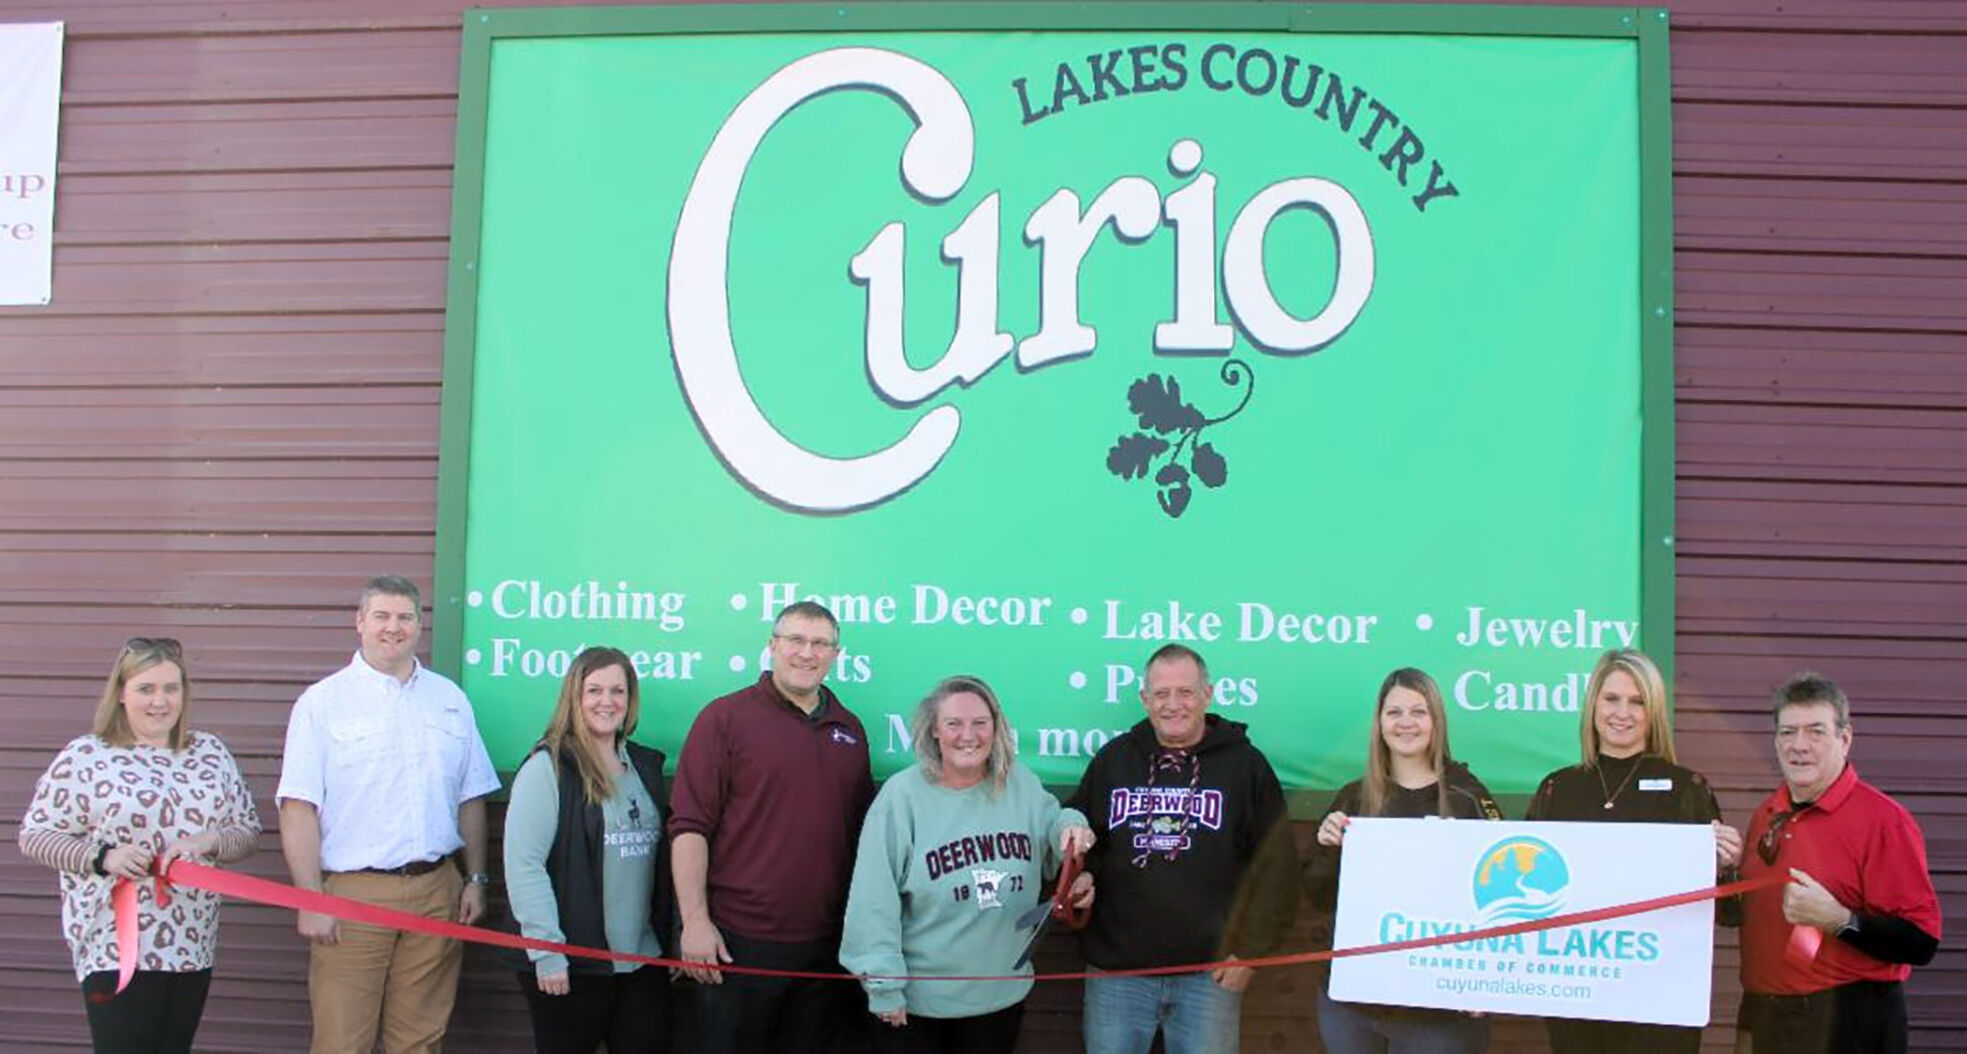 Lakes Country Curio opens in Deerwood | Business | messagemedia.co